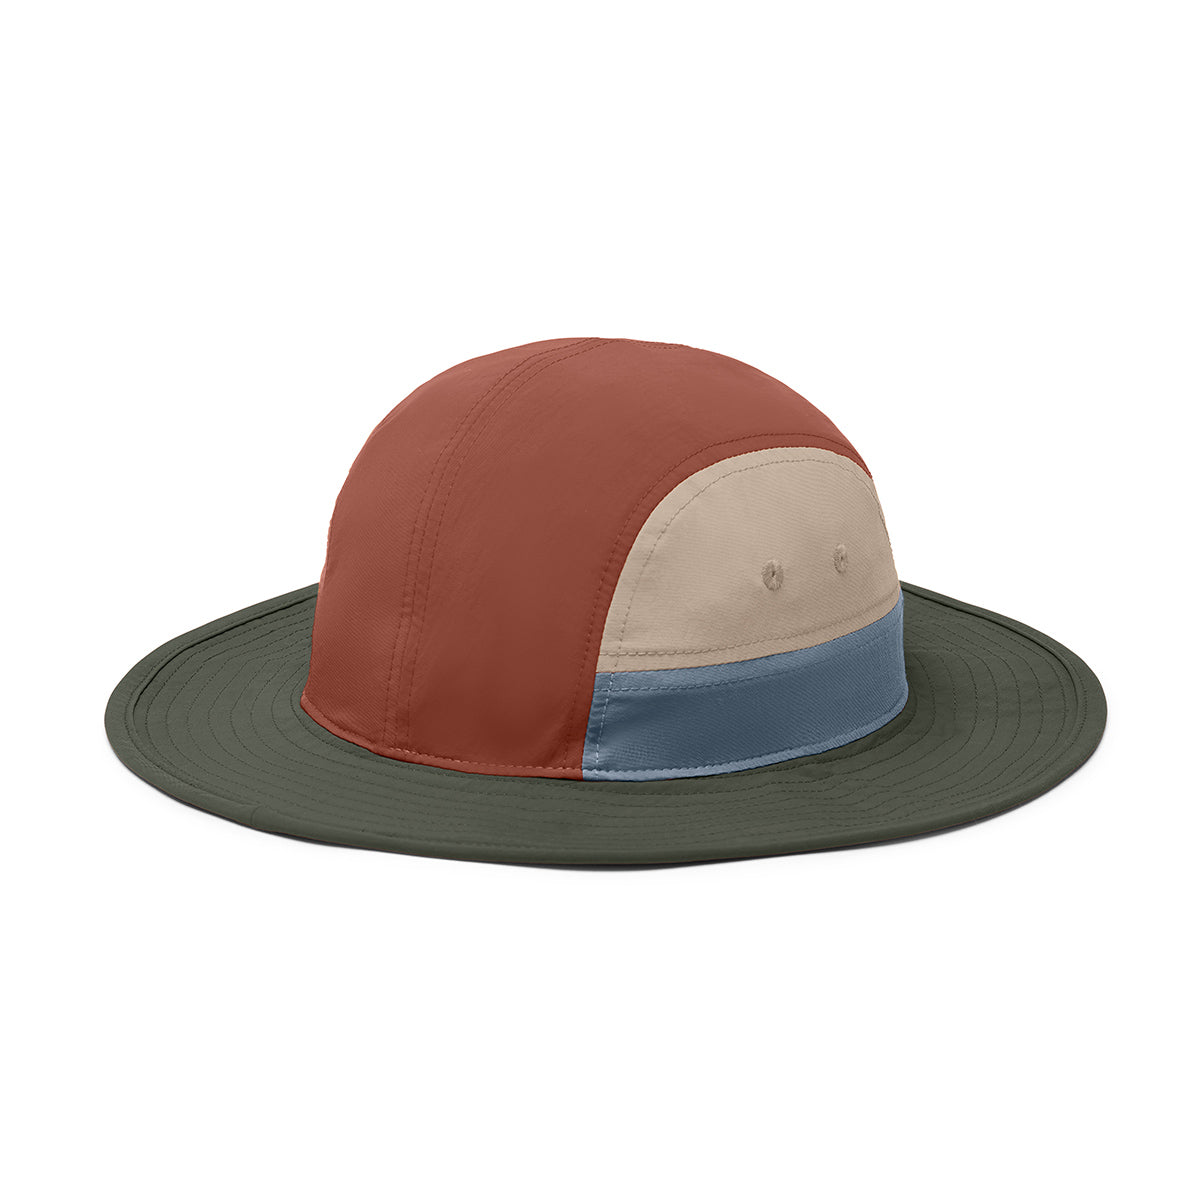 Cotopaxi Tech Bucket Hat コトパクシ テック バケットハット